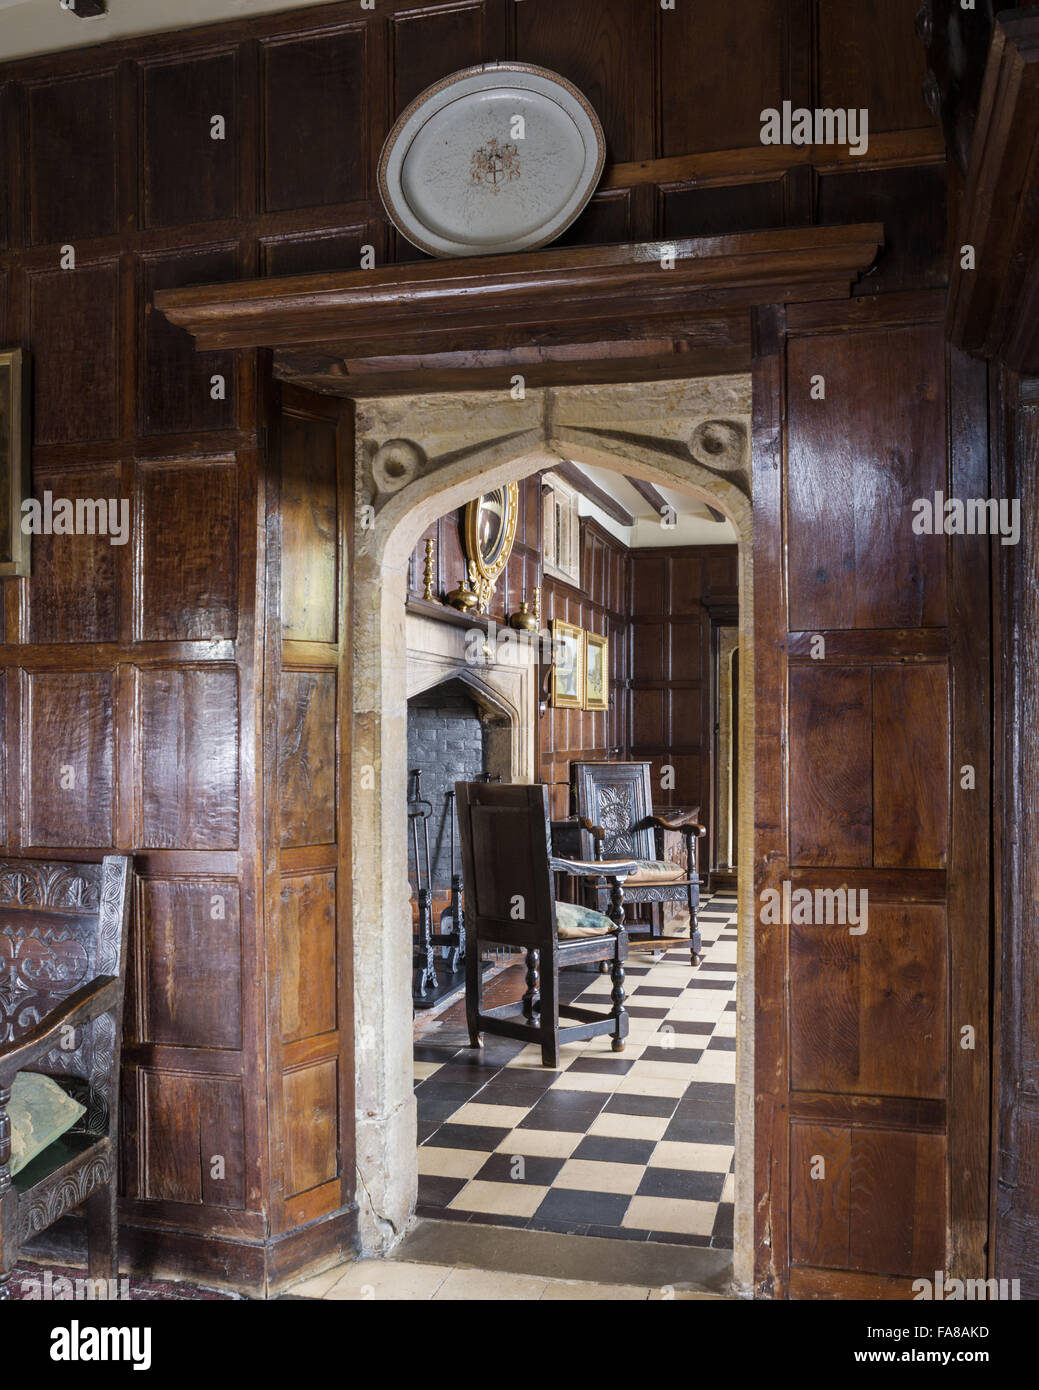 View of the Hall from the Inner Hall at Bateman's, East Sussex. Bateman's was the home of the writer Rudyard Kipling from 1902 to 1936. Stock Photo